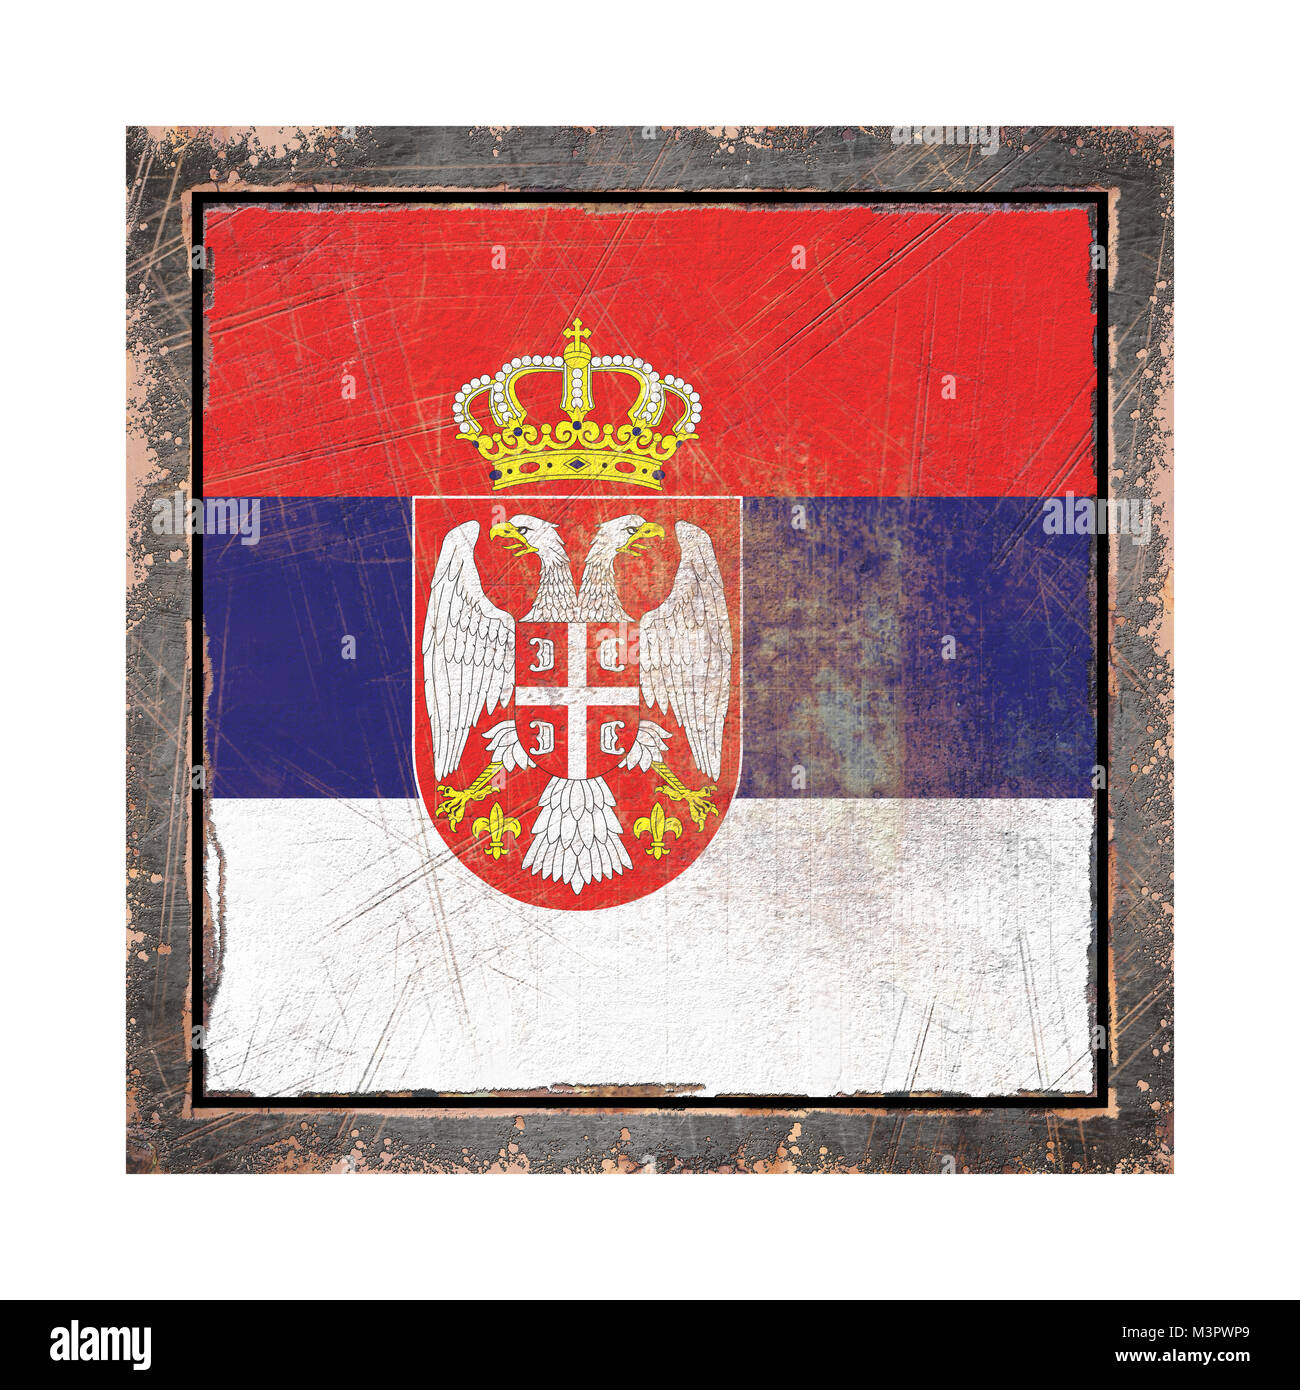 3d rendering of a Serbia flag over a rusty metallic plate wit a rusty frame. Isolated on white background. Stock Photo